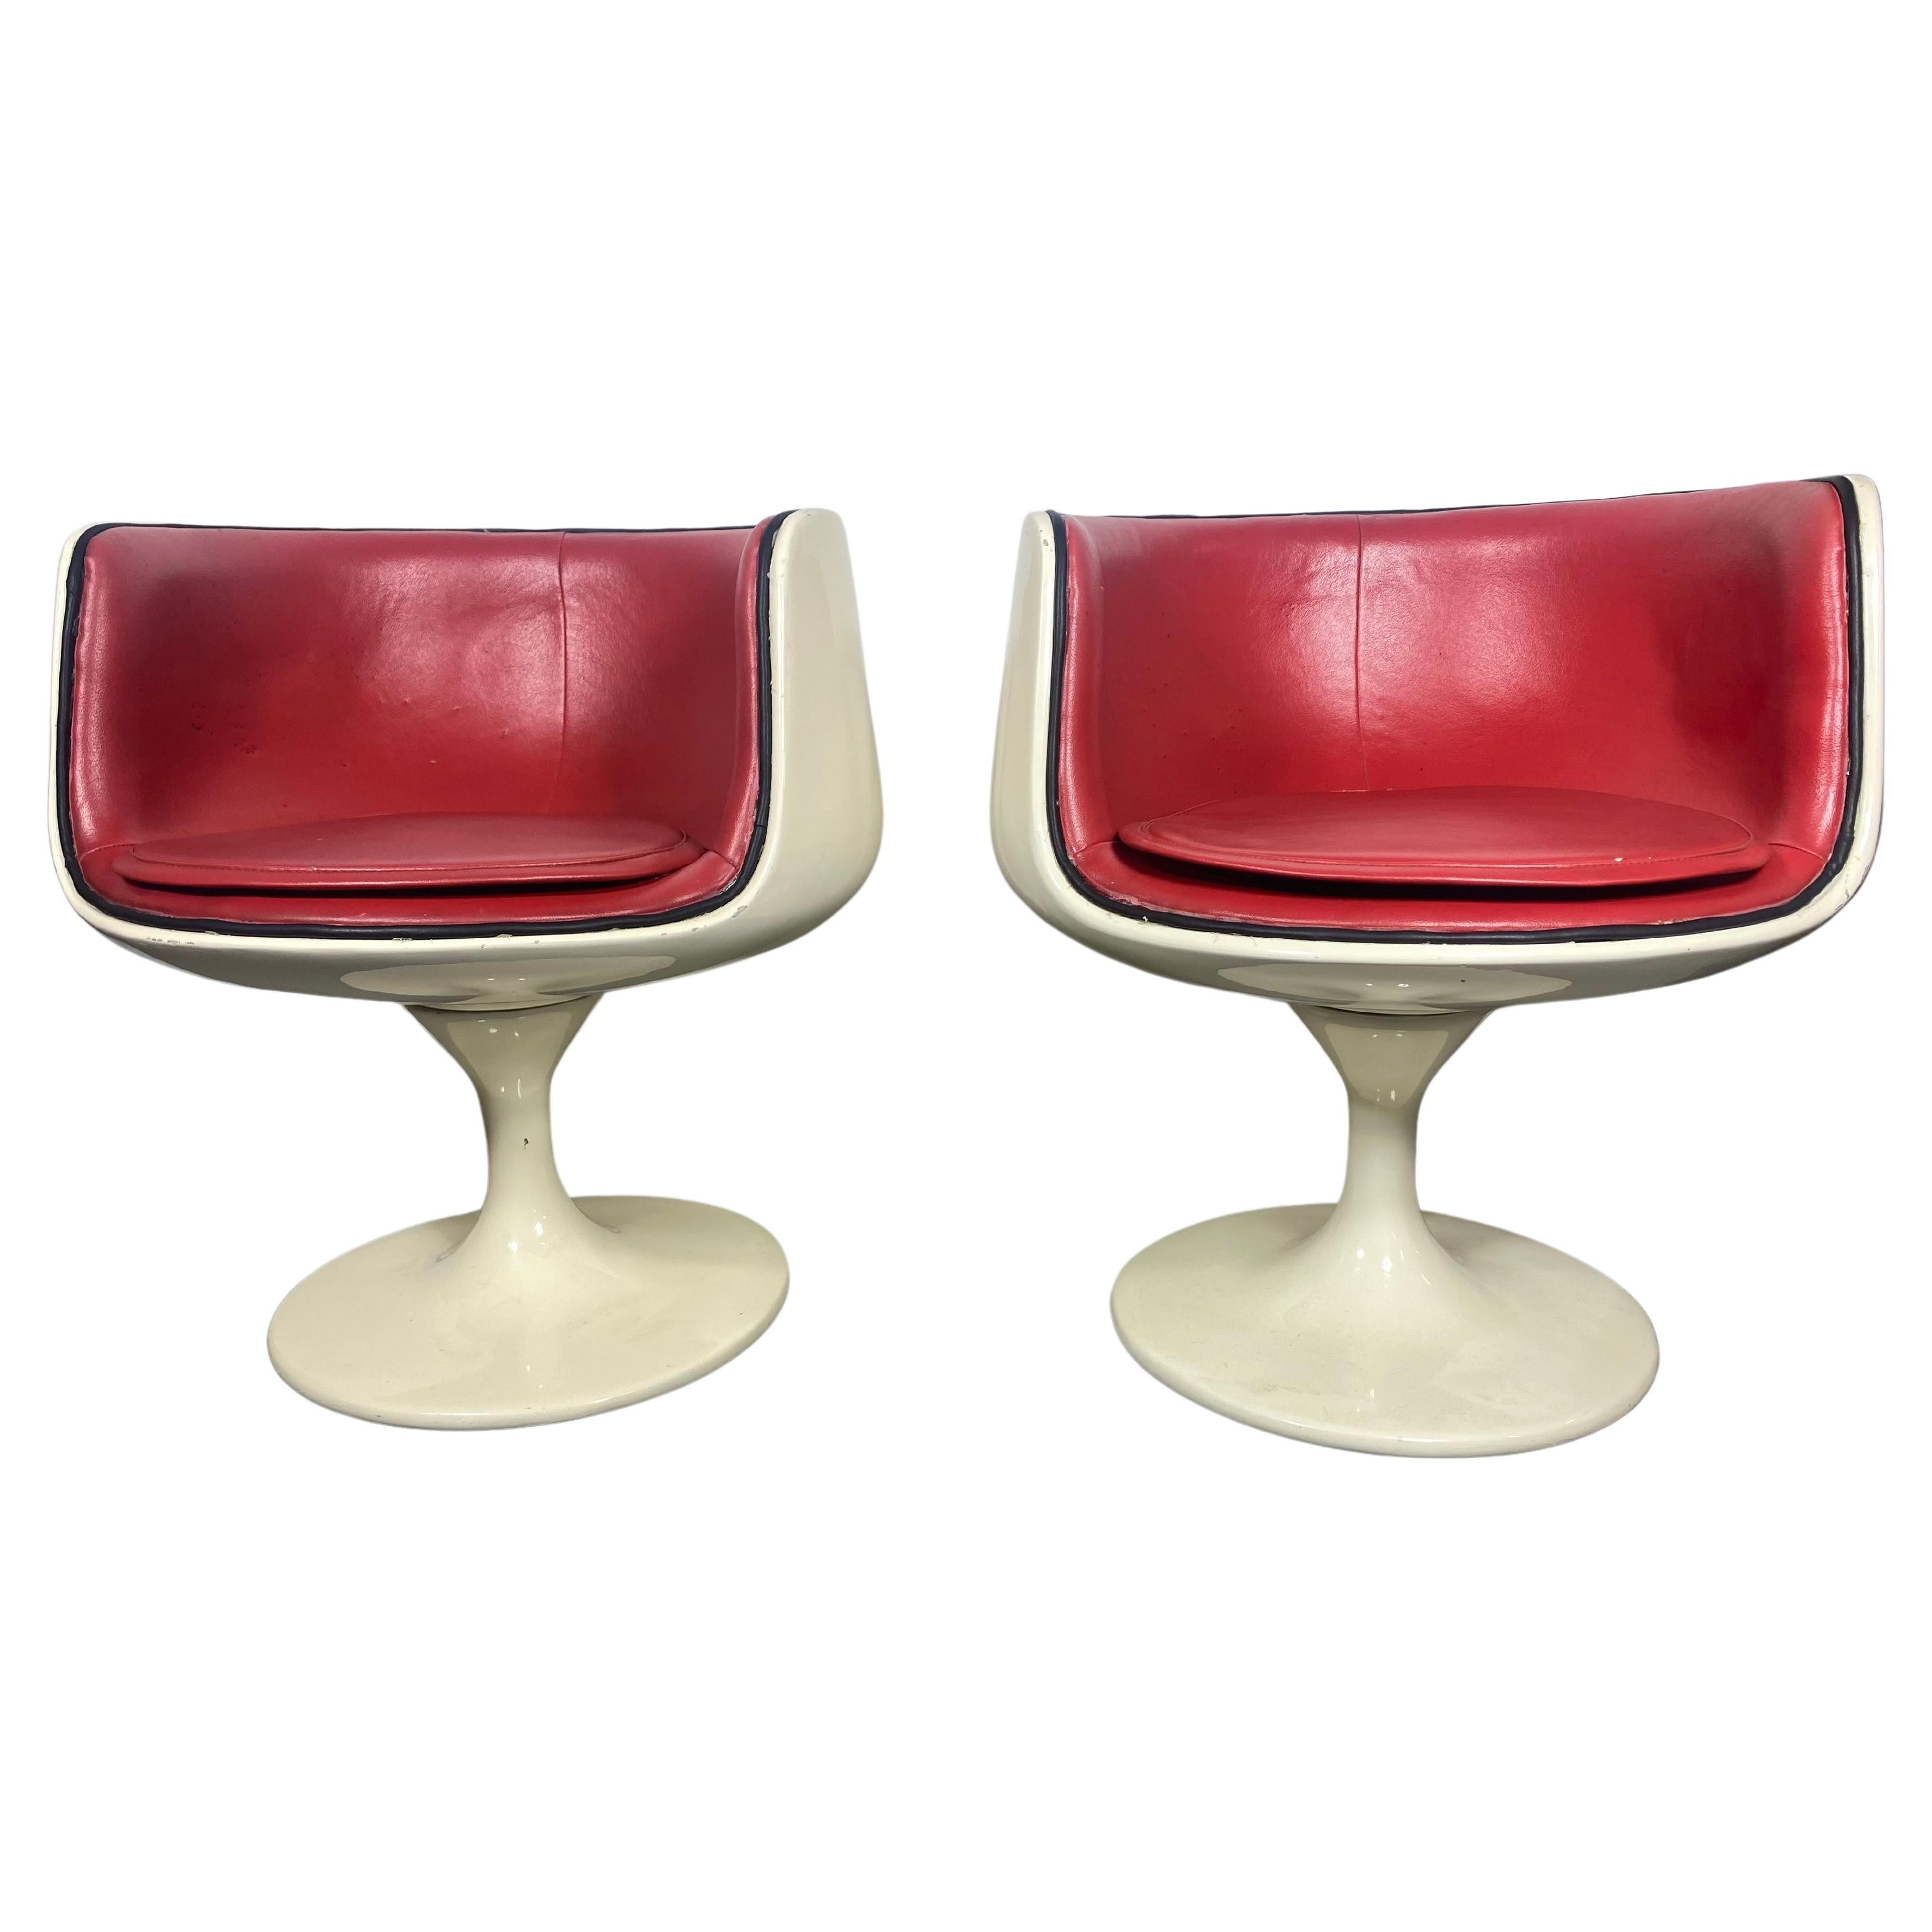  Eero Aarnio, Asko Cognac V.S.O.P Chairs... Classic Pop MOdernist  For Sale